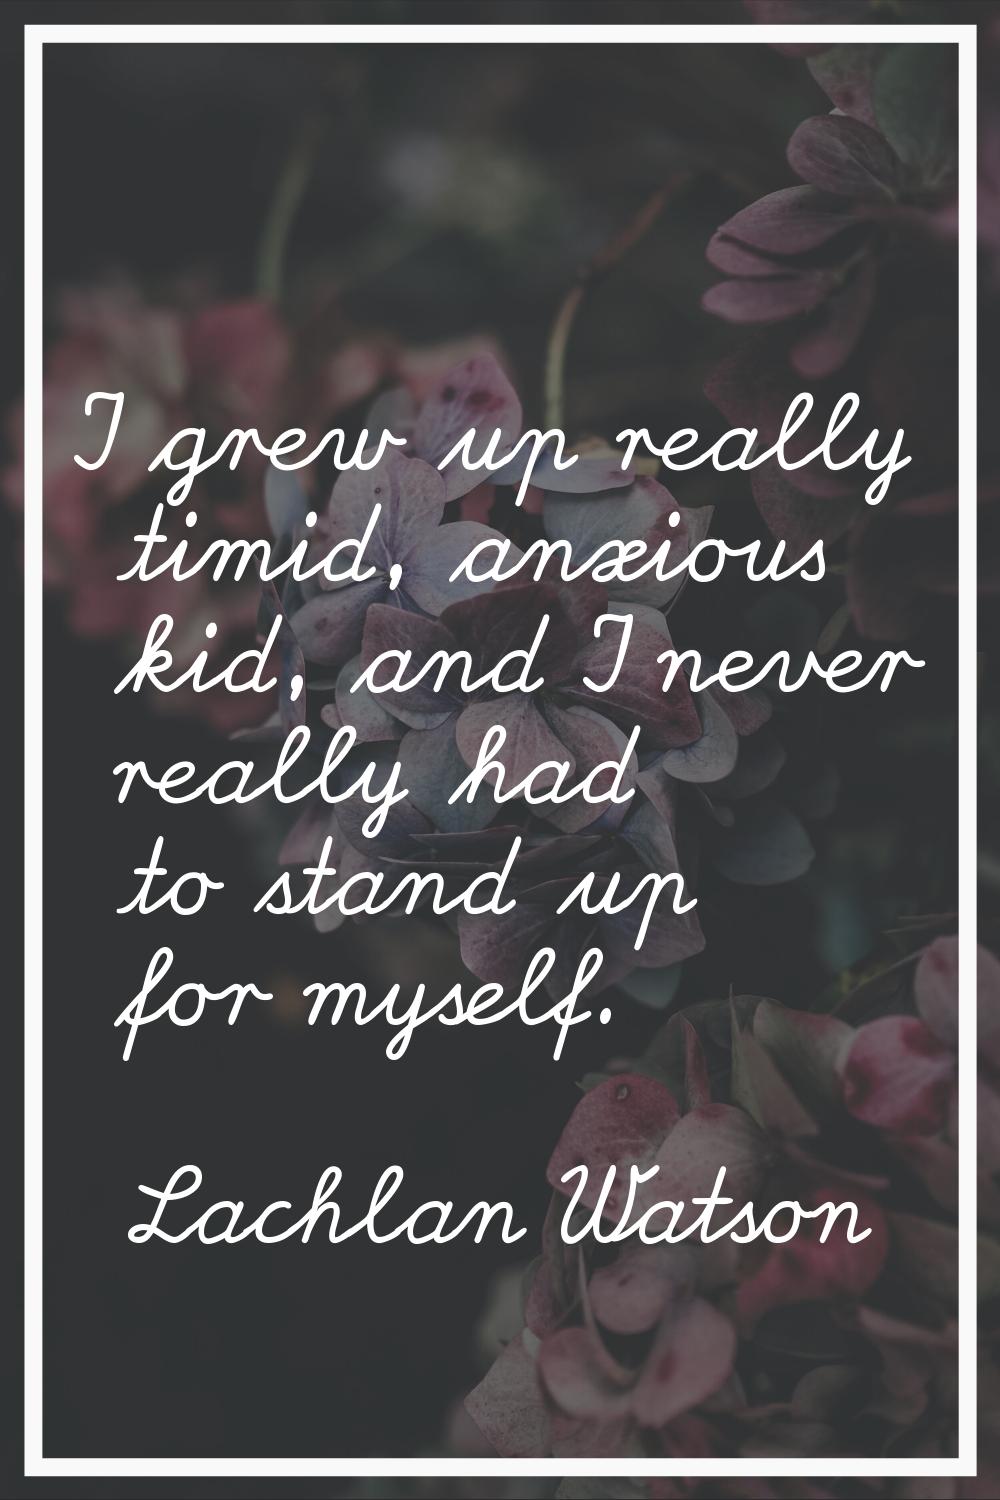 I grew up really timid, anxious kid, and I never really had to stand up for myself.